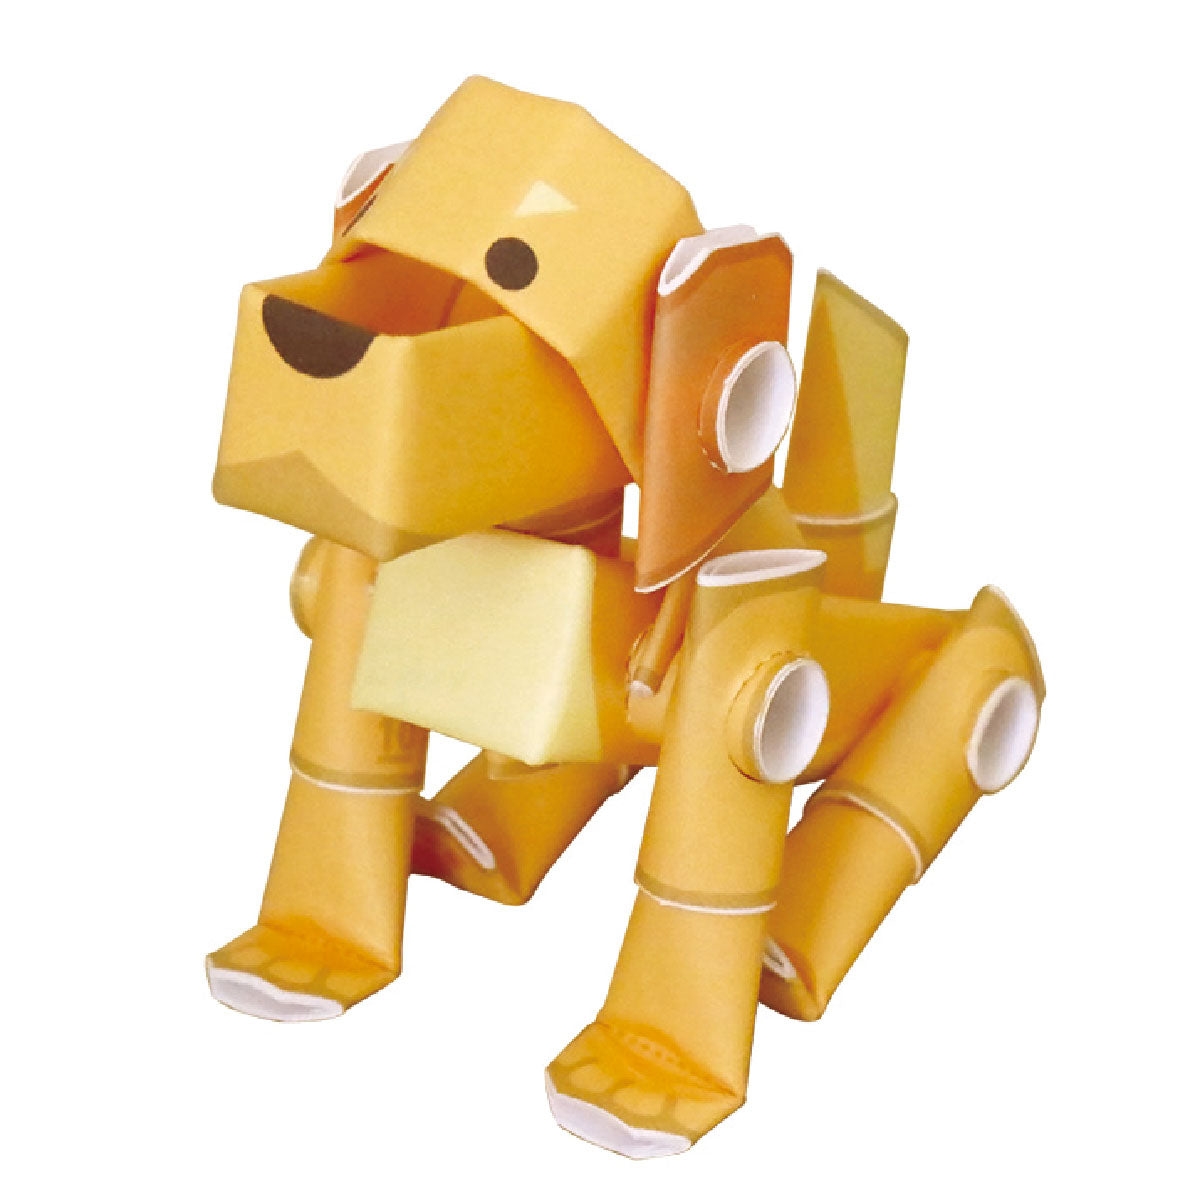 Just cut, fold, and connect the unique pipes to assemble your favorite animal with movable joints. 